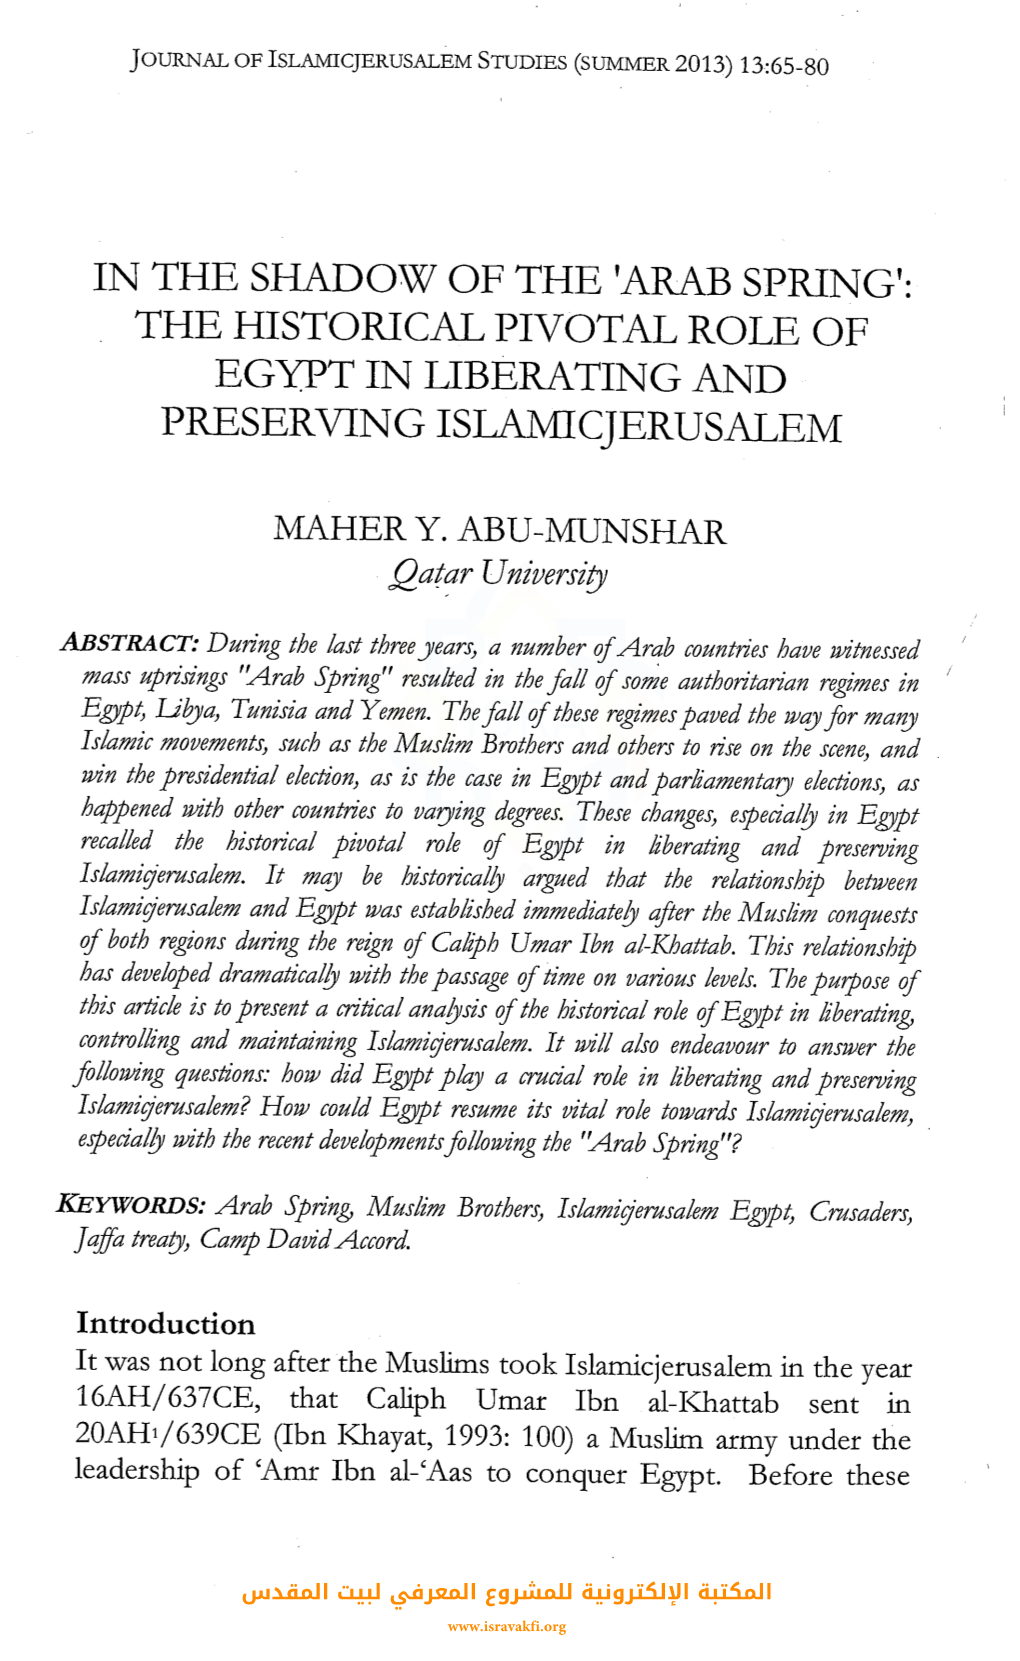 The Historical Pivotal Role of Egypt in Liberating and Preserving Islamicjerusalem